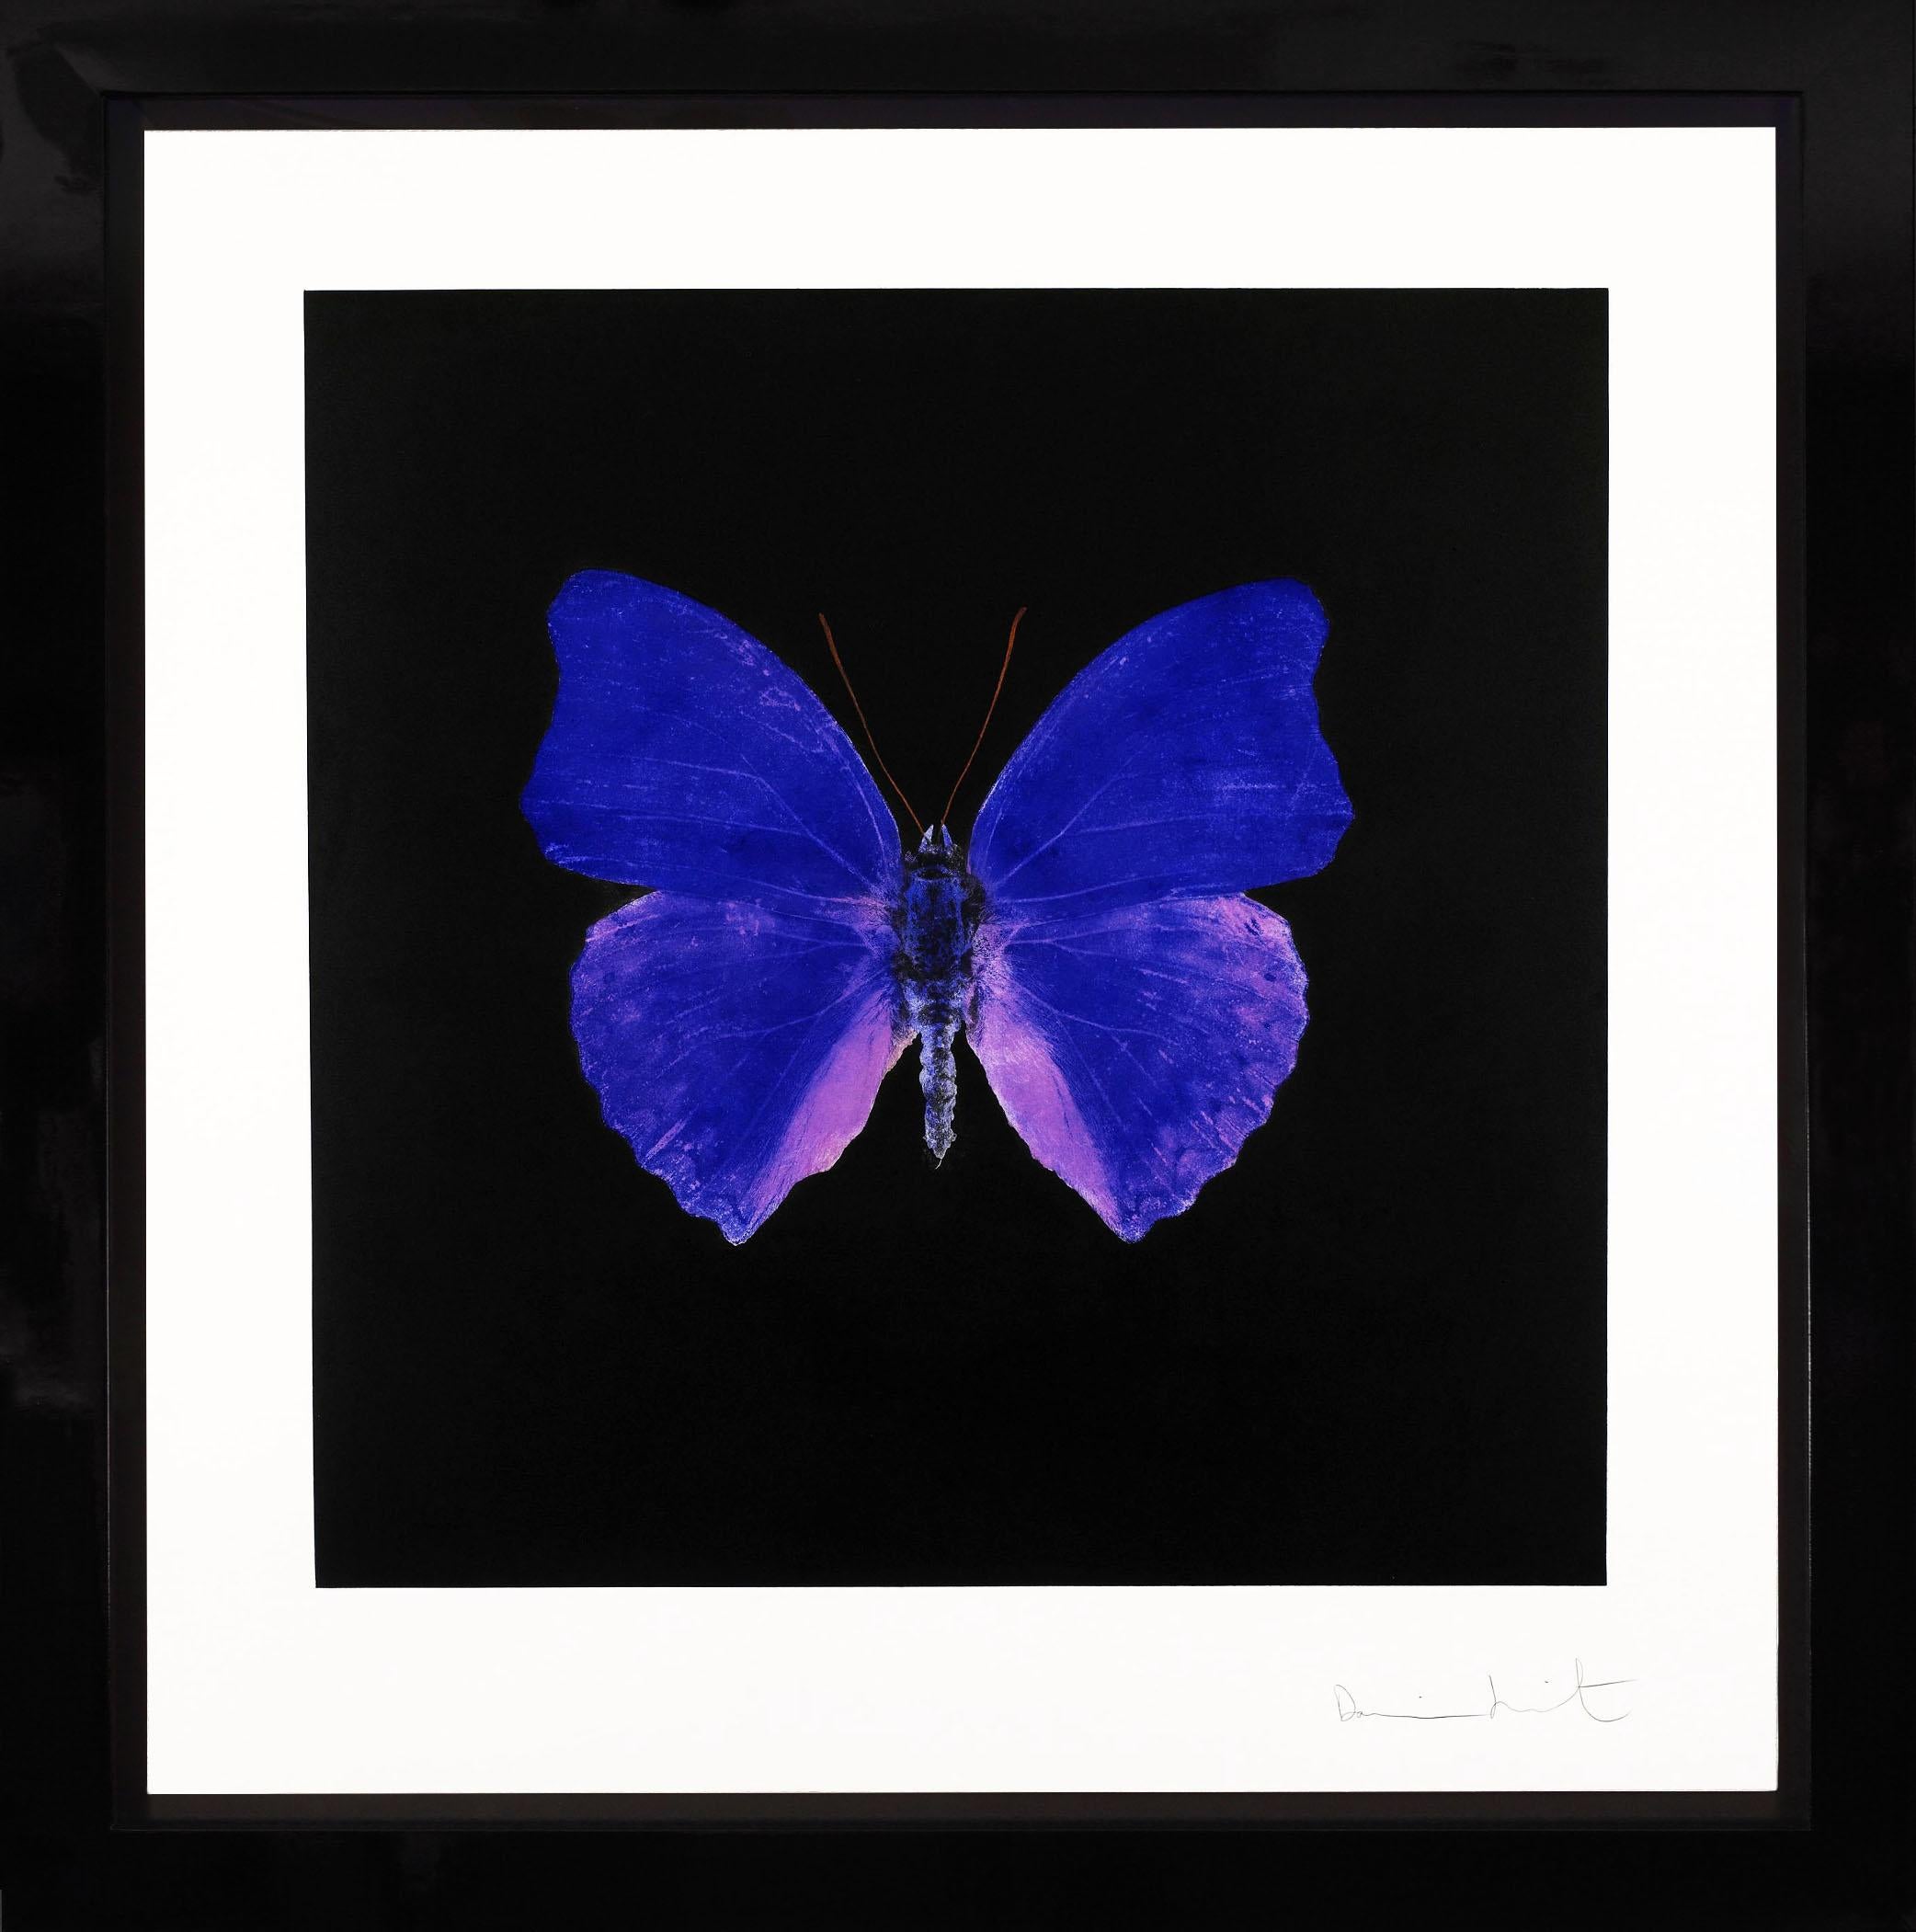 The Butterfly Souls in Cobalt by Damien Hirst is an etching on Velin Arches Paper. Created in 2007 as a part of a limited edition of only 72 in existence. The vibrant and dark color scheme is both classic and deeply alluring, offering the viewer a